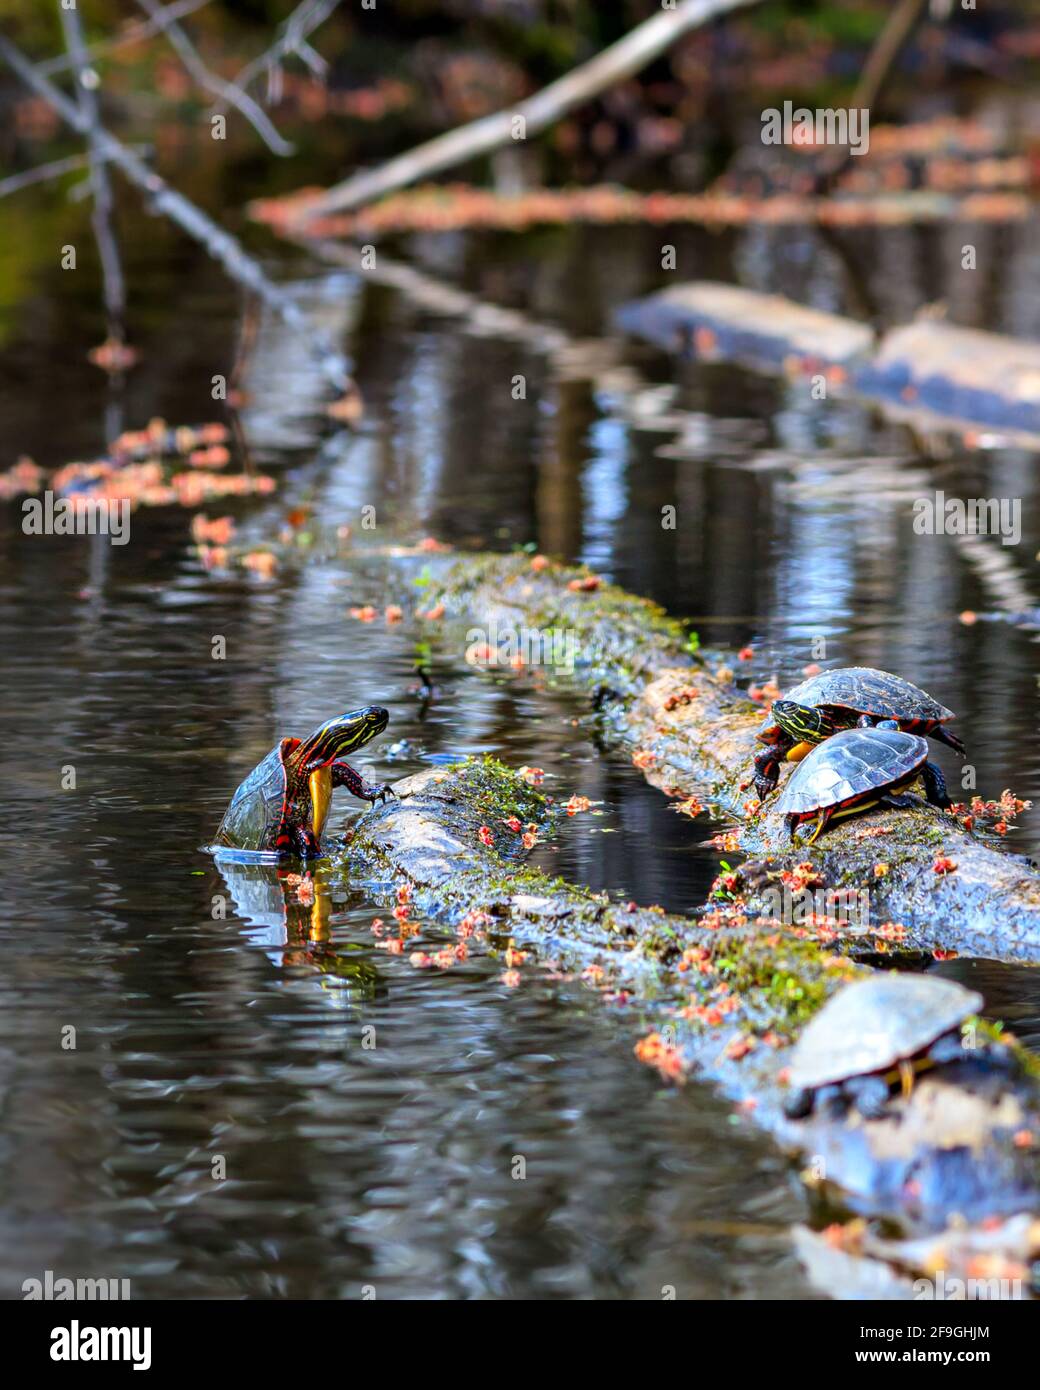 A midland painted turtle (Chrysemys picta marginata) climbs a floating log to join others sunning themselves in a pond. Fallen flowers of maple trees Stock Photo